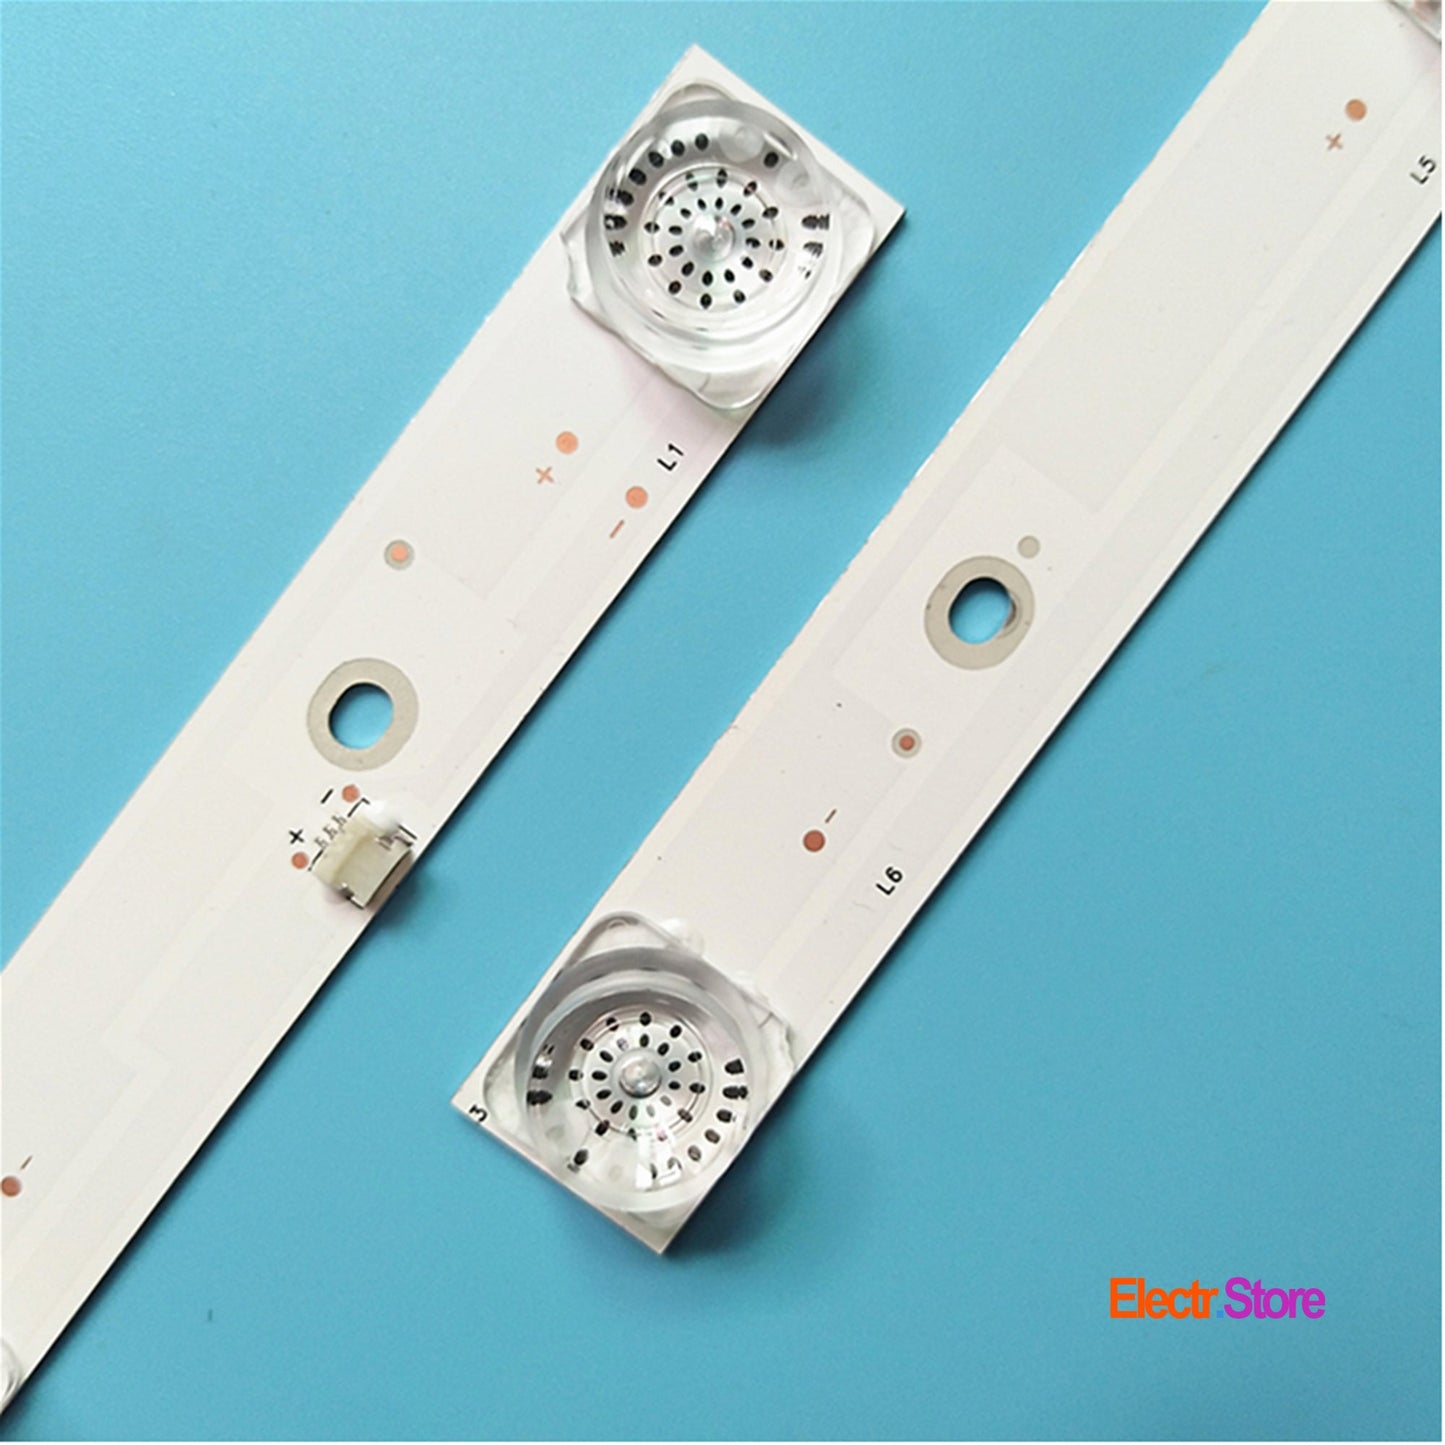 LED Backlight Strip Kits, CC02320D510V06 32E20 2x6 6S1P 1910 0D20, CC02320D510V09 32E20 2x6 6S1P 1410 0D20, MS-L2027 (2 pcs/kit), for TV 32" PANDA: 32D6S 32" CC02320D510V06 32e20 2x6 6s1p 1910 0d20 Dexp LED Backlights LEVEL Matrix Panda UNITED Electr.Store